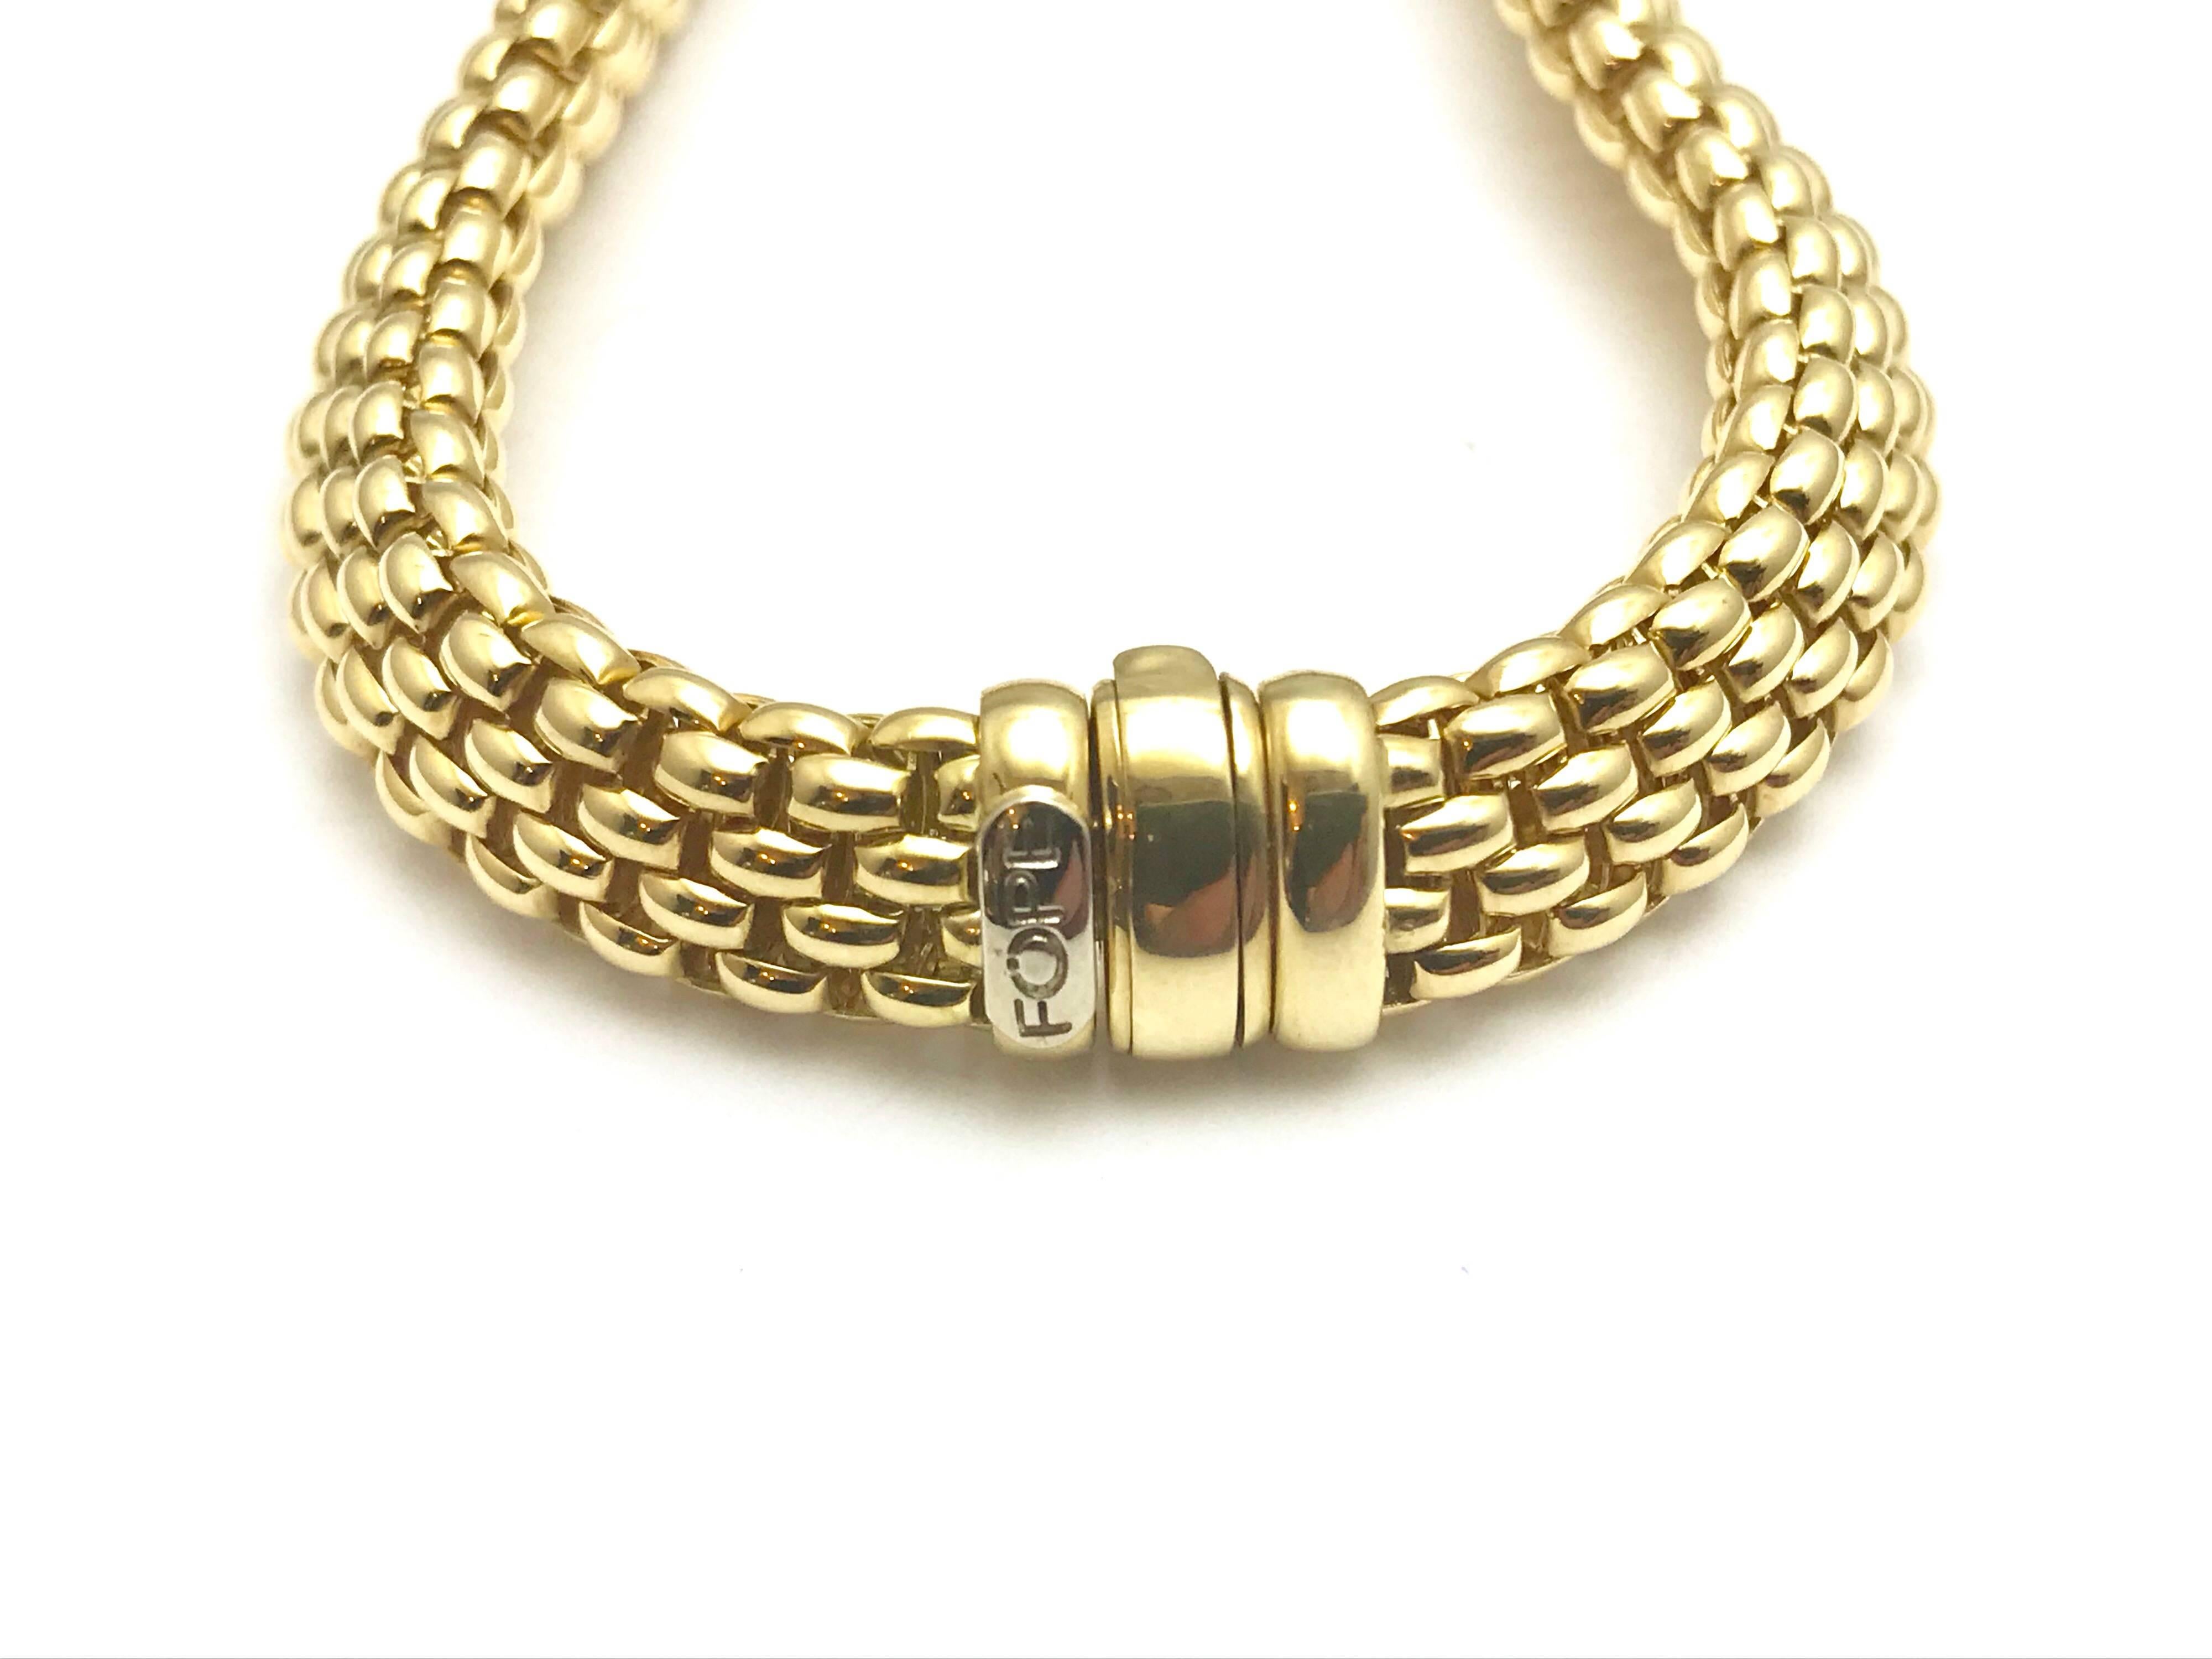 A Fope Italian designed 18 karat yellow gold bracelet. The bracelet is designed with woven links, creating a very soft feel, and measures 10.00mm wide. The bracelet is 7.50 inches in length. 

Signature: FOPE
Hallmark: 750